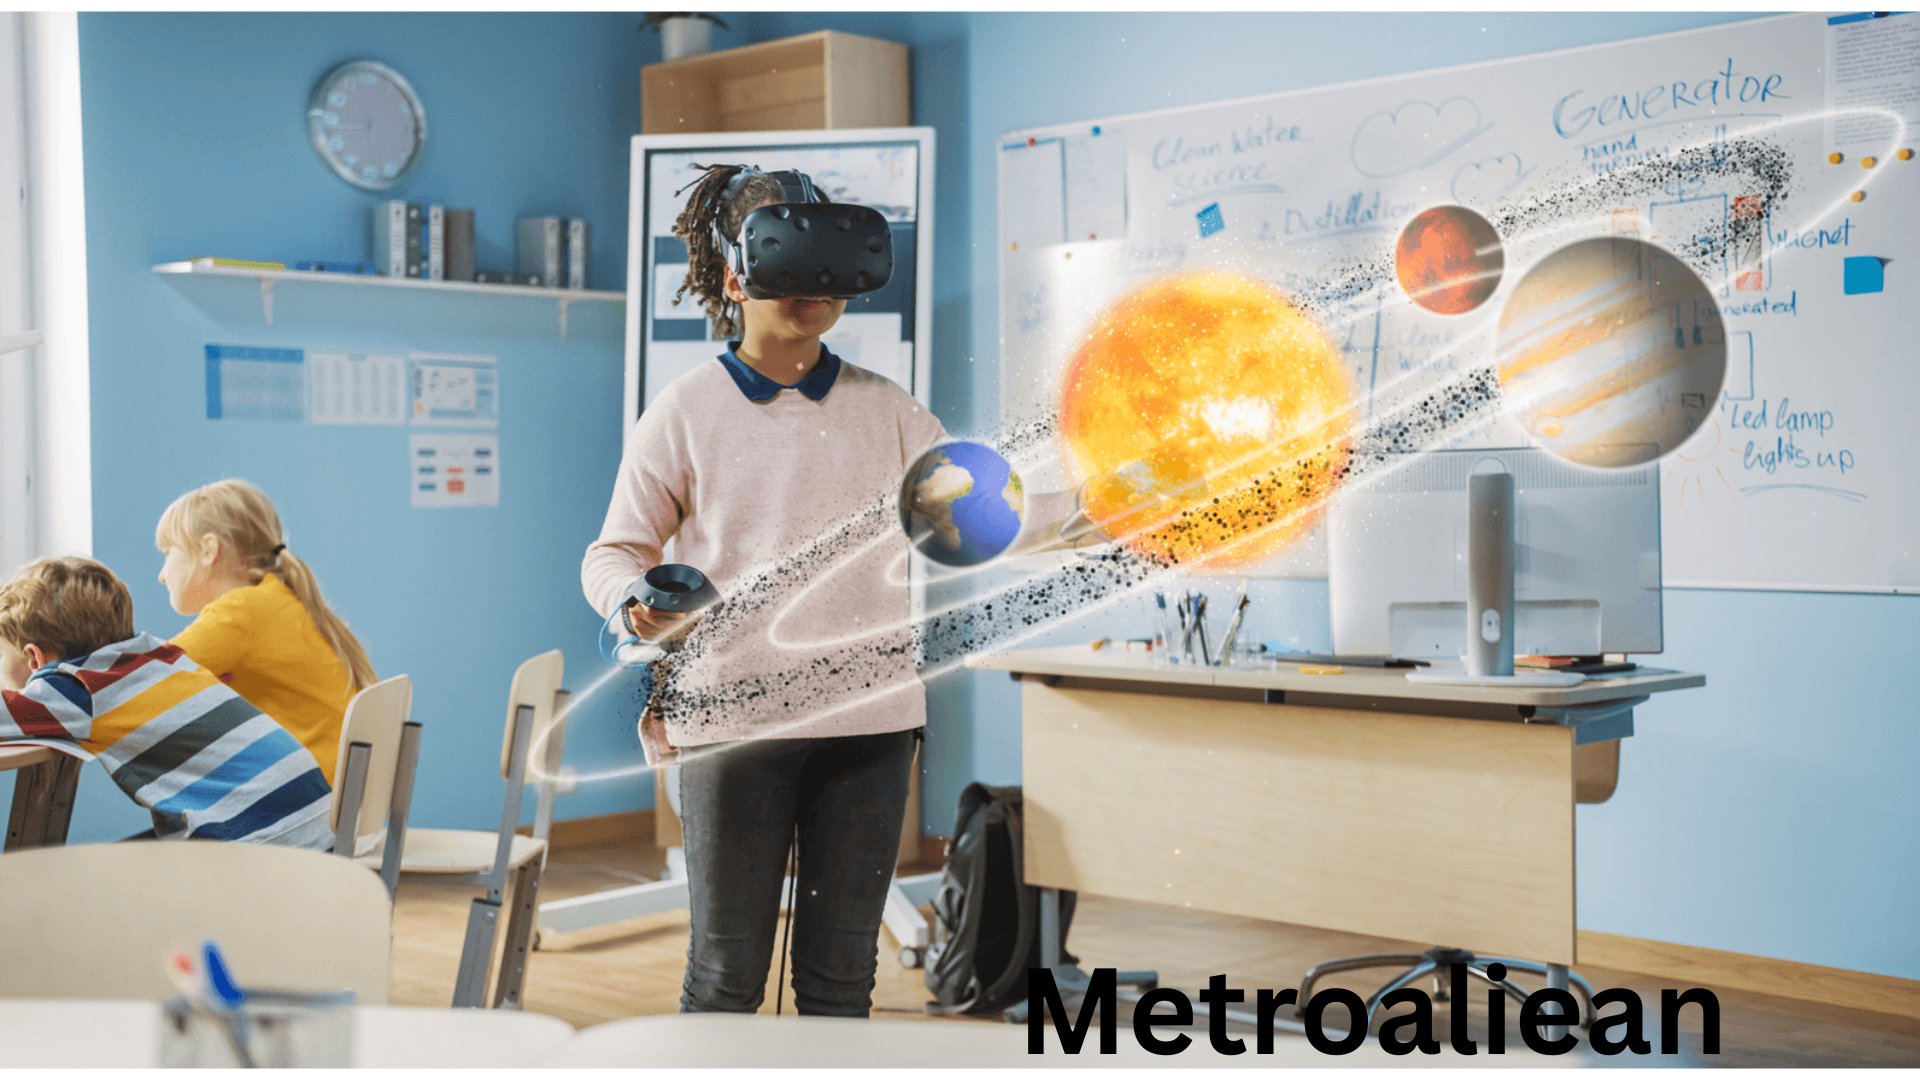 Education in the Metaverse